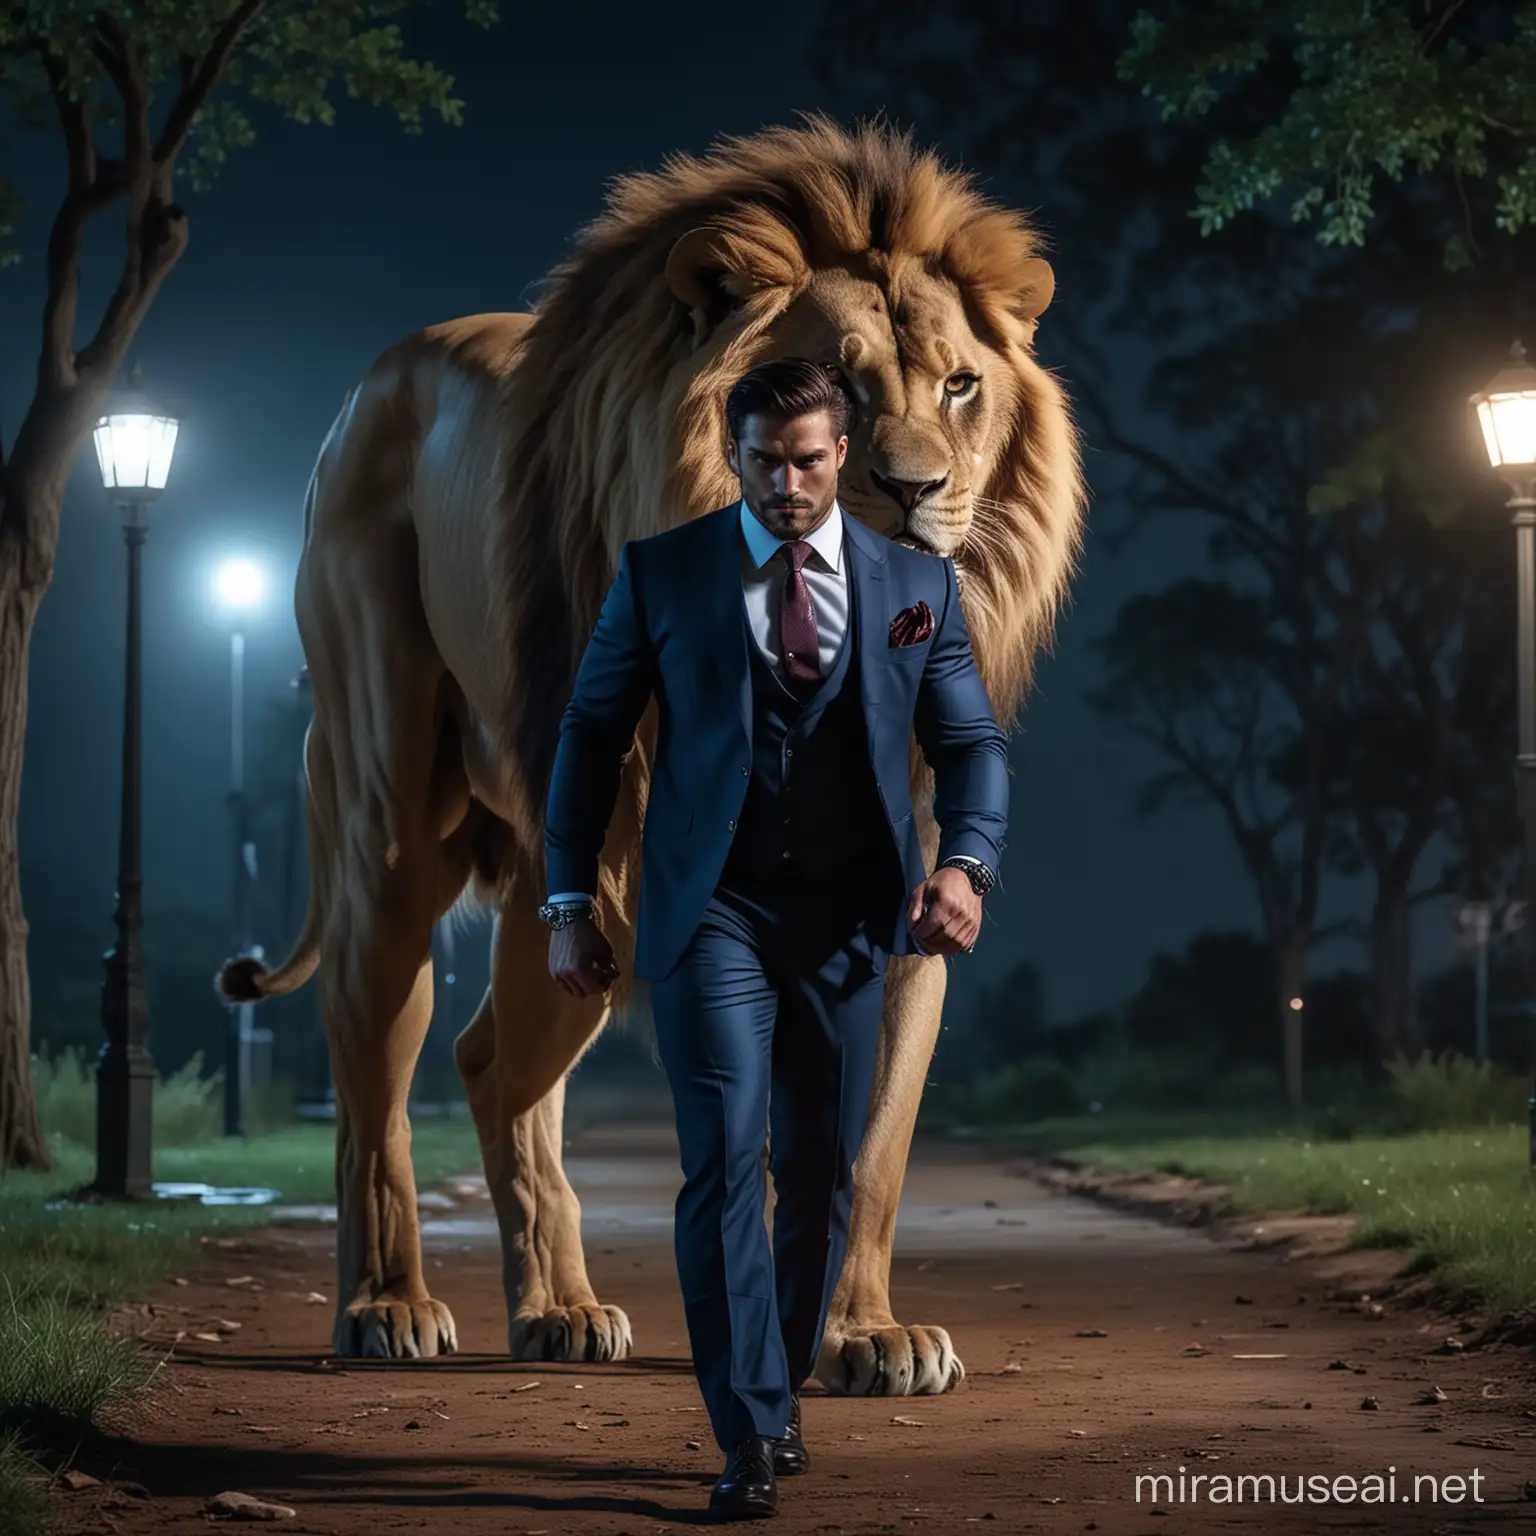 A very bulked muscular man dressed in a suit and shiny acccessories,   walking a fierce blood thirsty lion along a park, the background is of midnight with only moonlight shining blue light over the scene